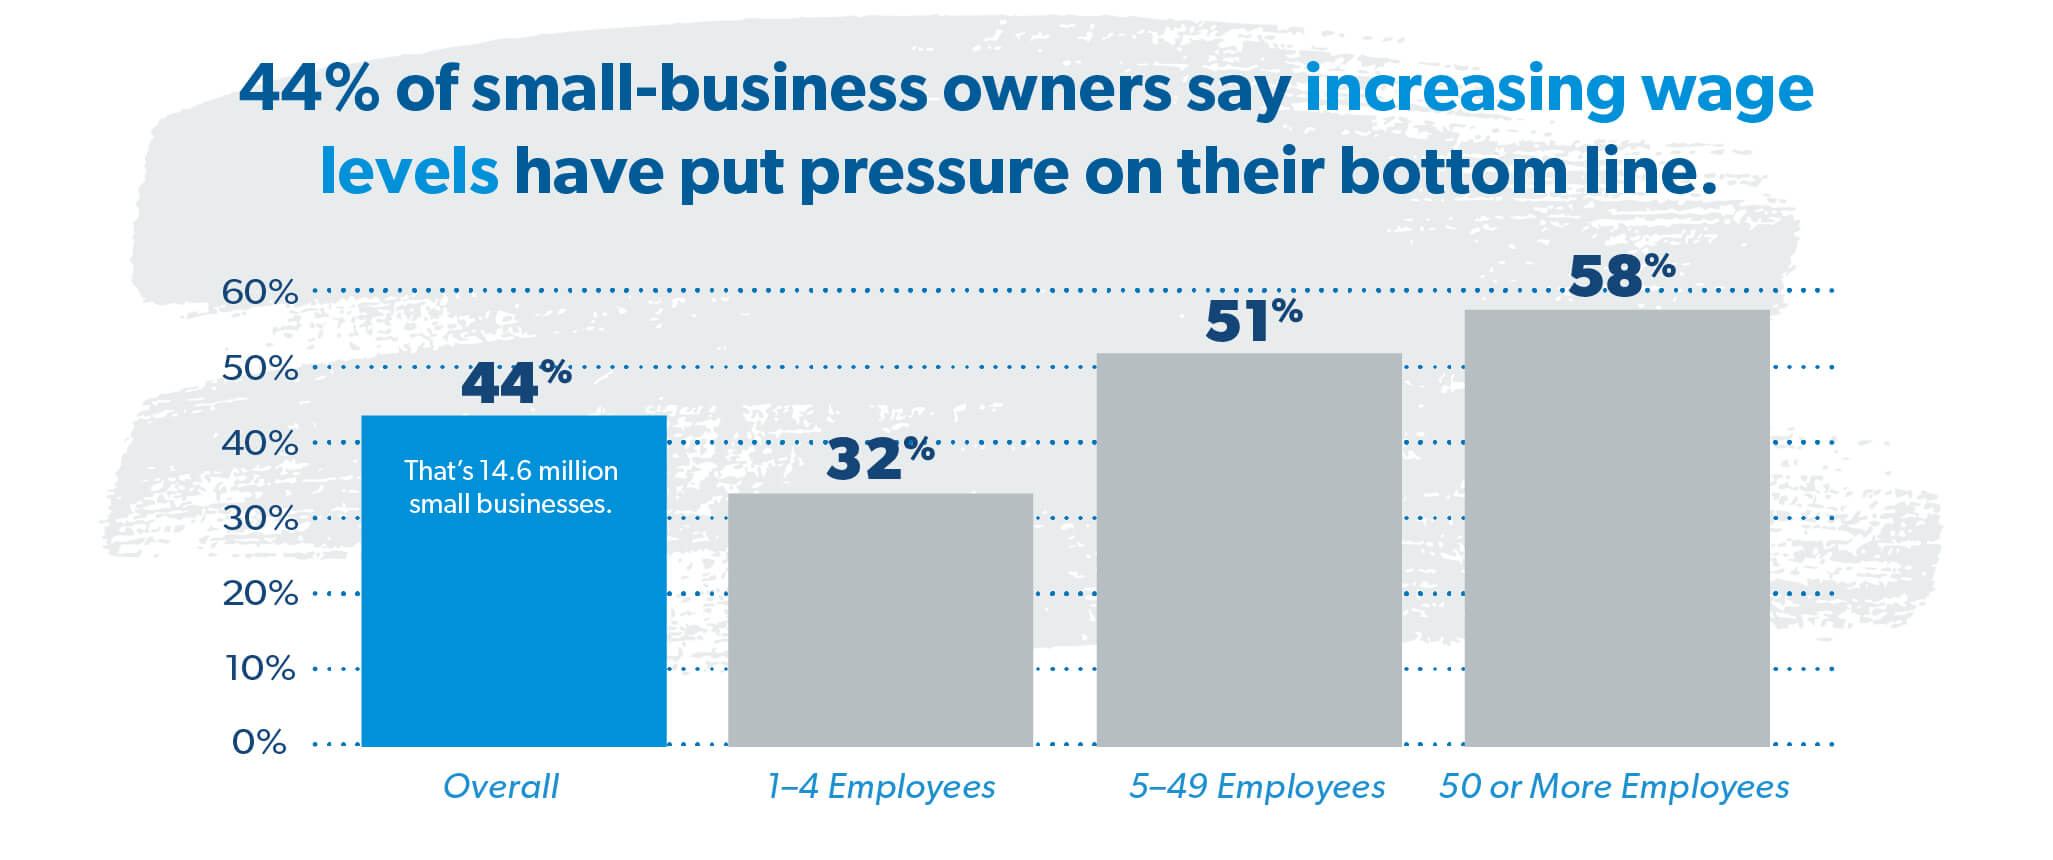 44% of small-business owners say increasing wage levels have put pressure on their bottom line